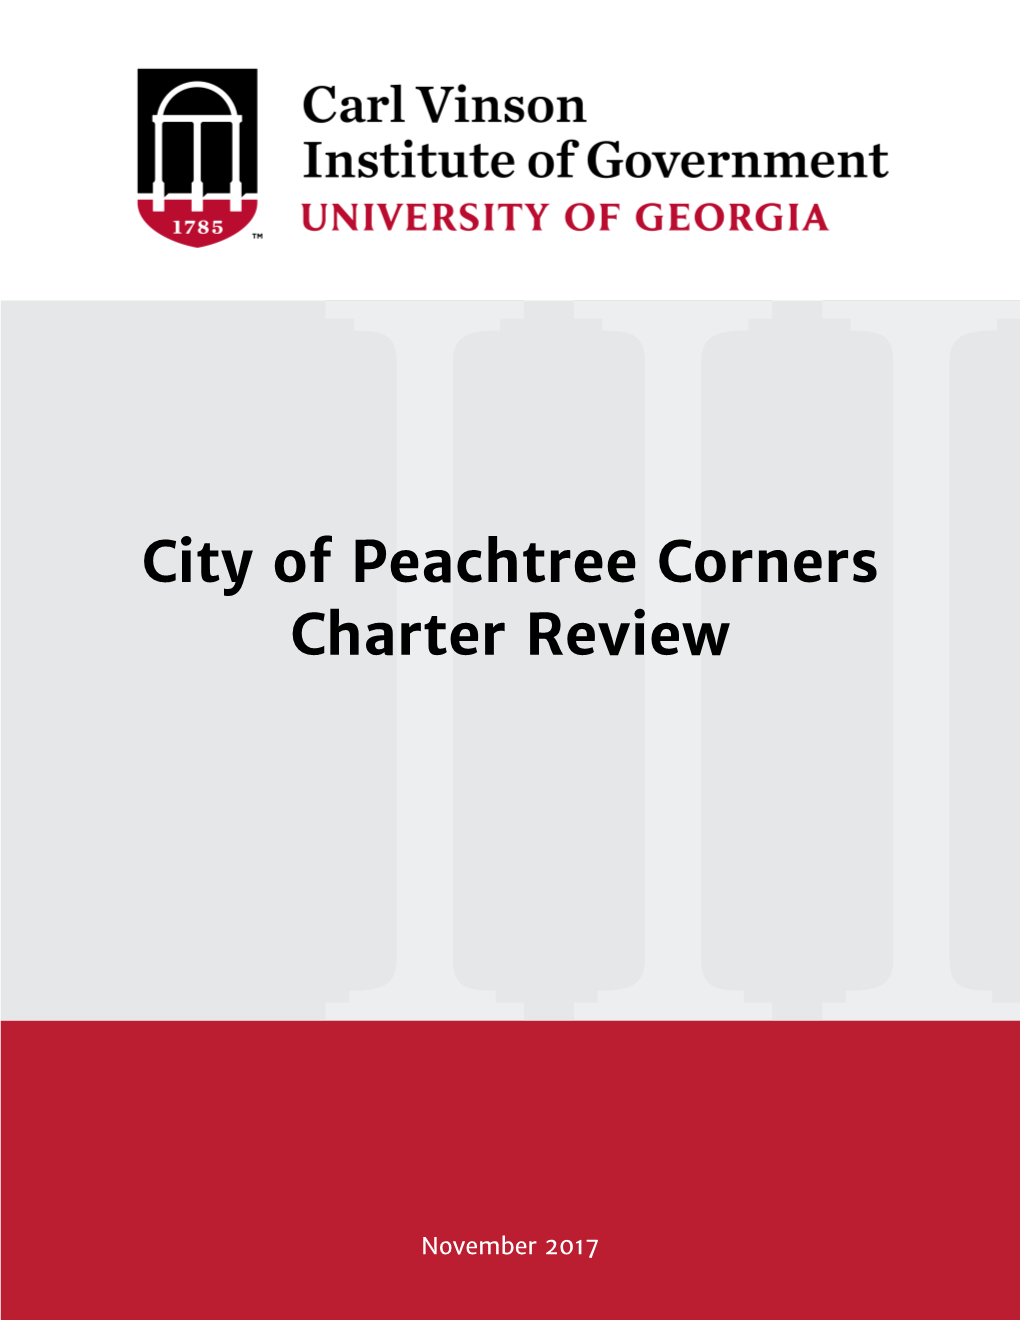 City of Peachtree Corners Charter Review